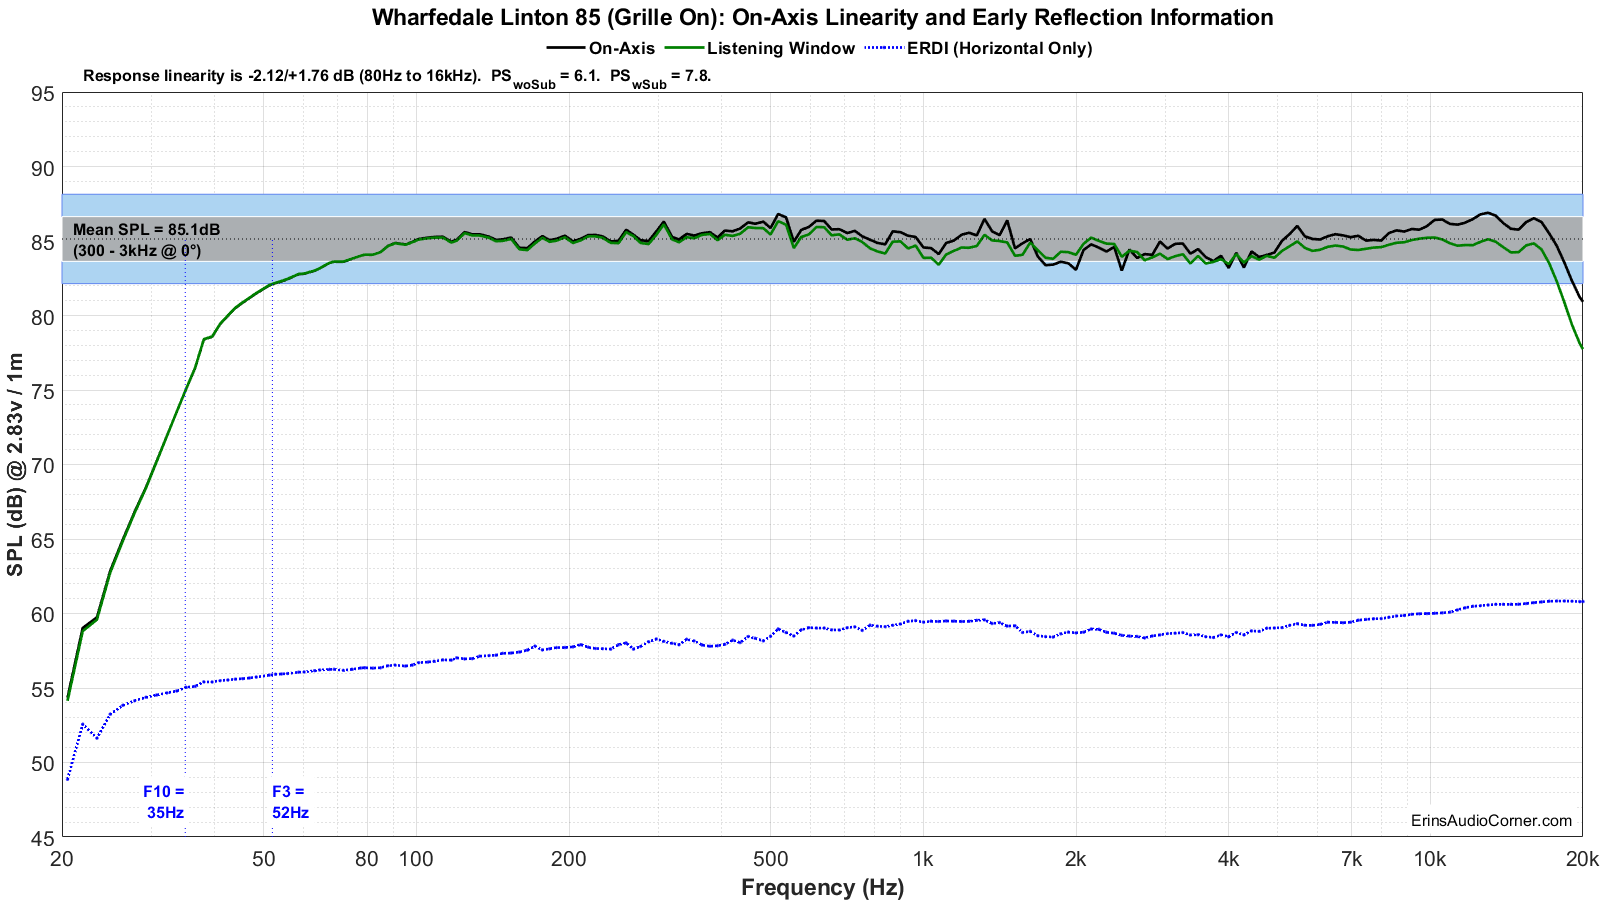 Wharfedale Linton 85 (Grille On) FR_Linearity.png